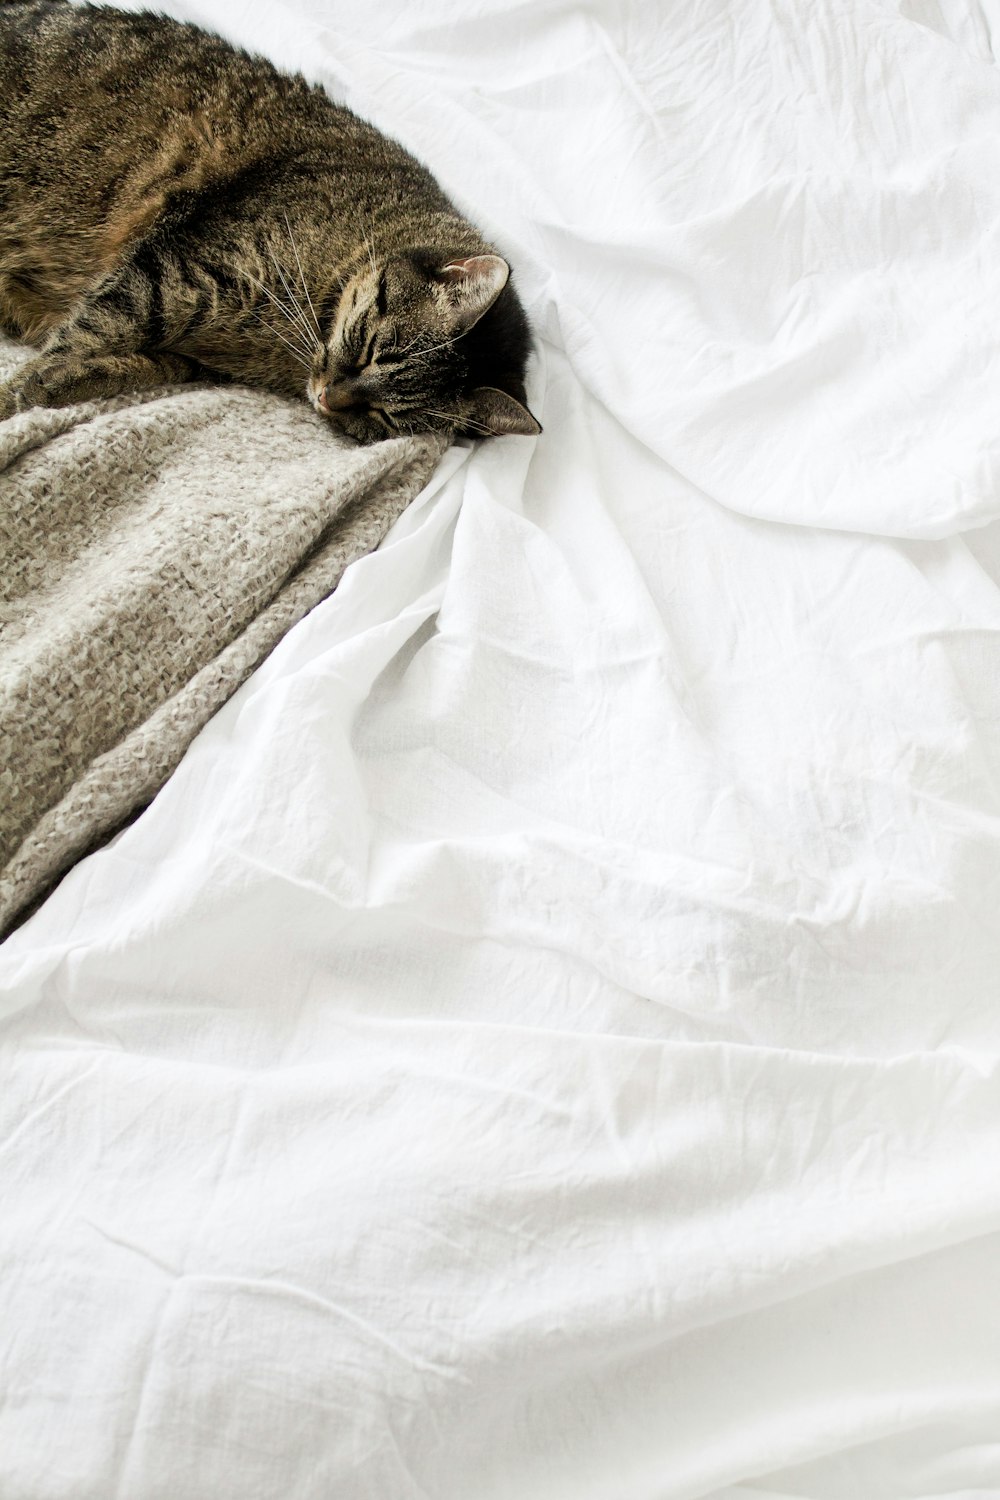 White Bed Sheets Pictures | Download Free Images on Unsplash